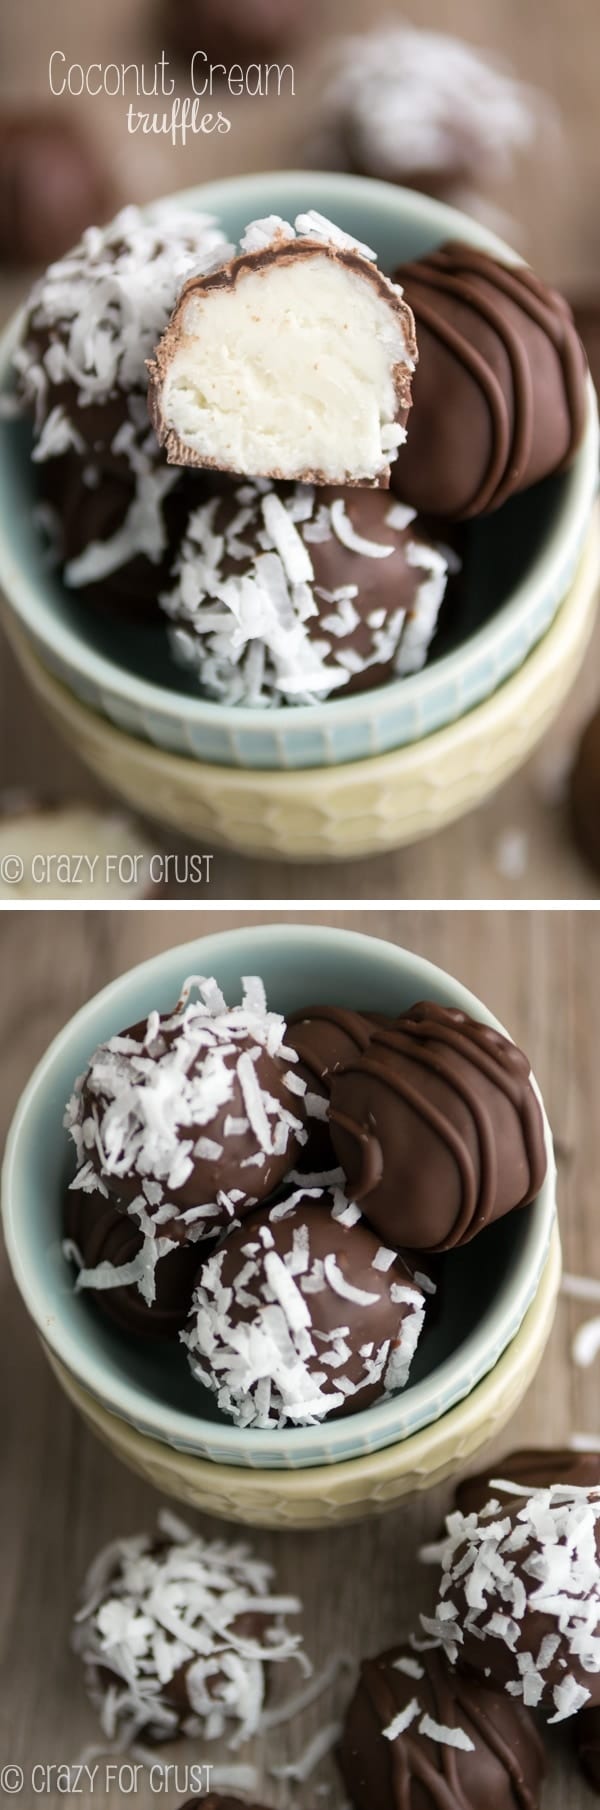 Two photo collage of Coconut Cream truffles in blue and green bowls